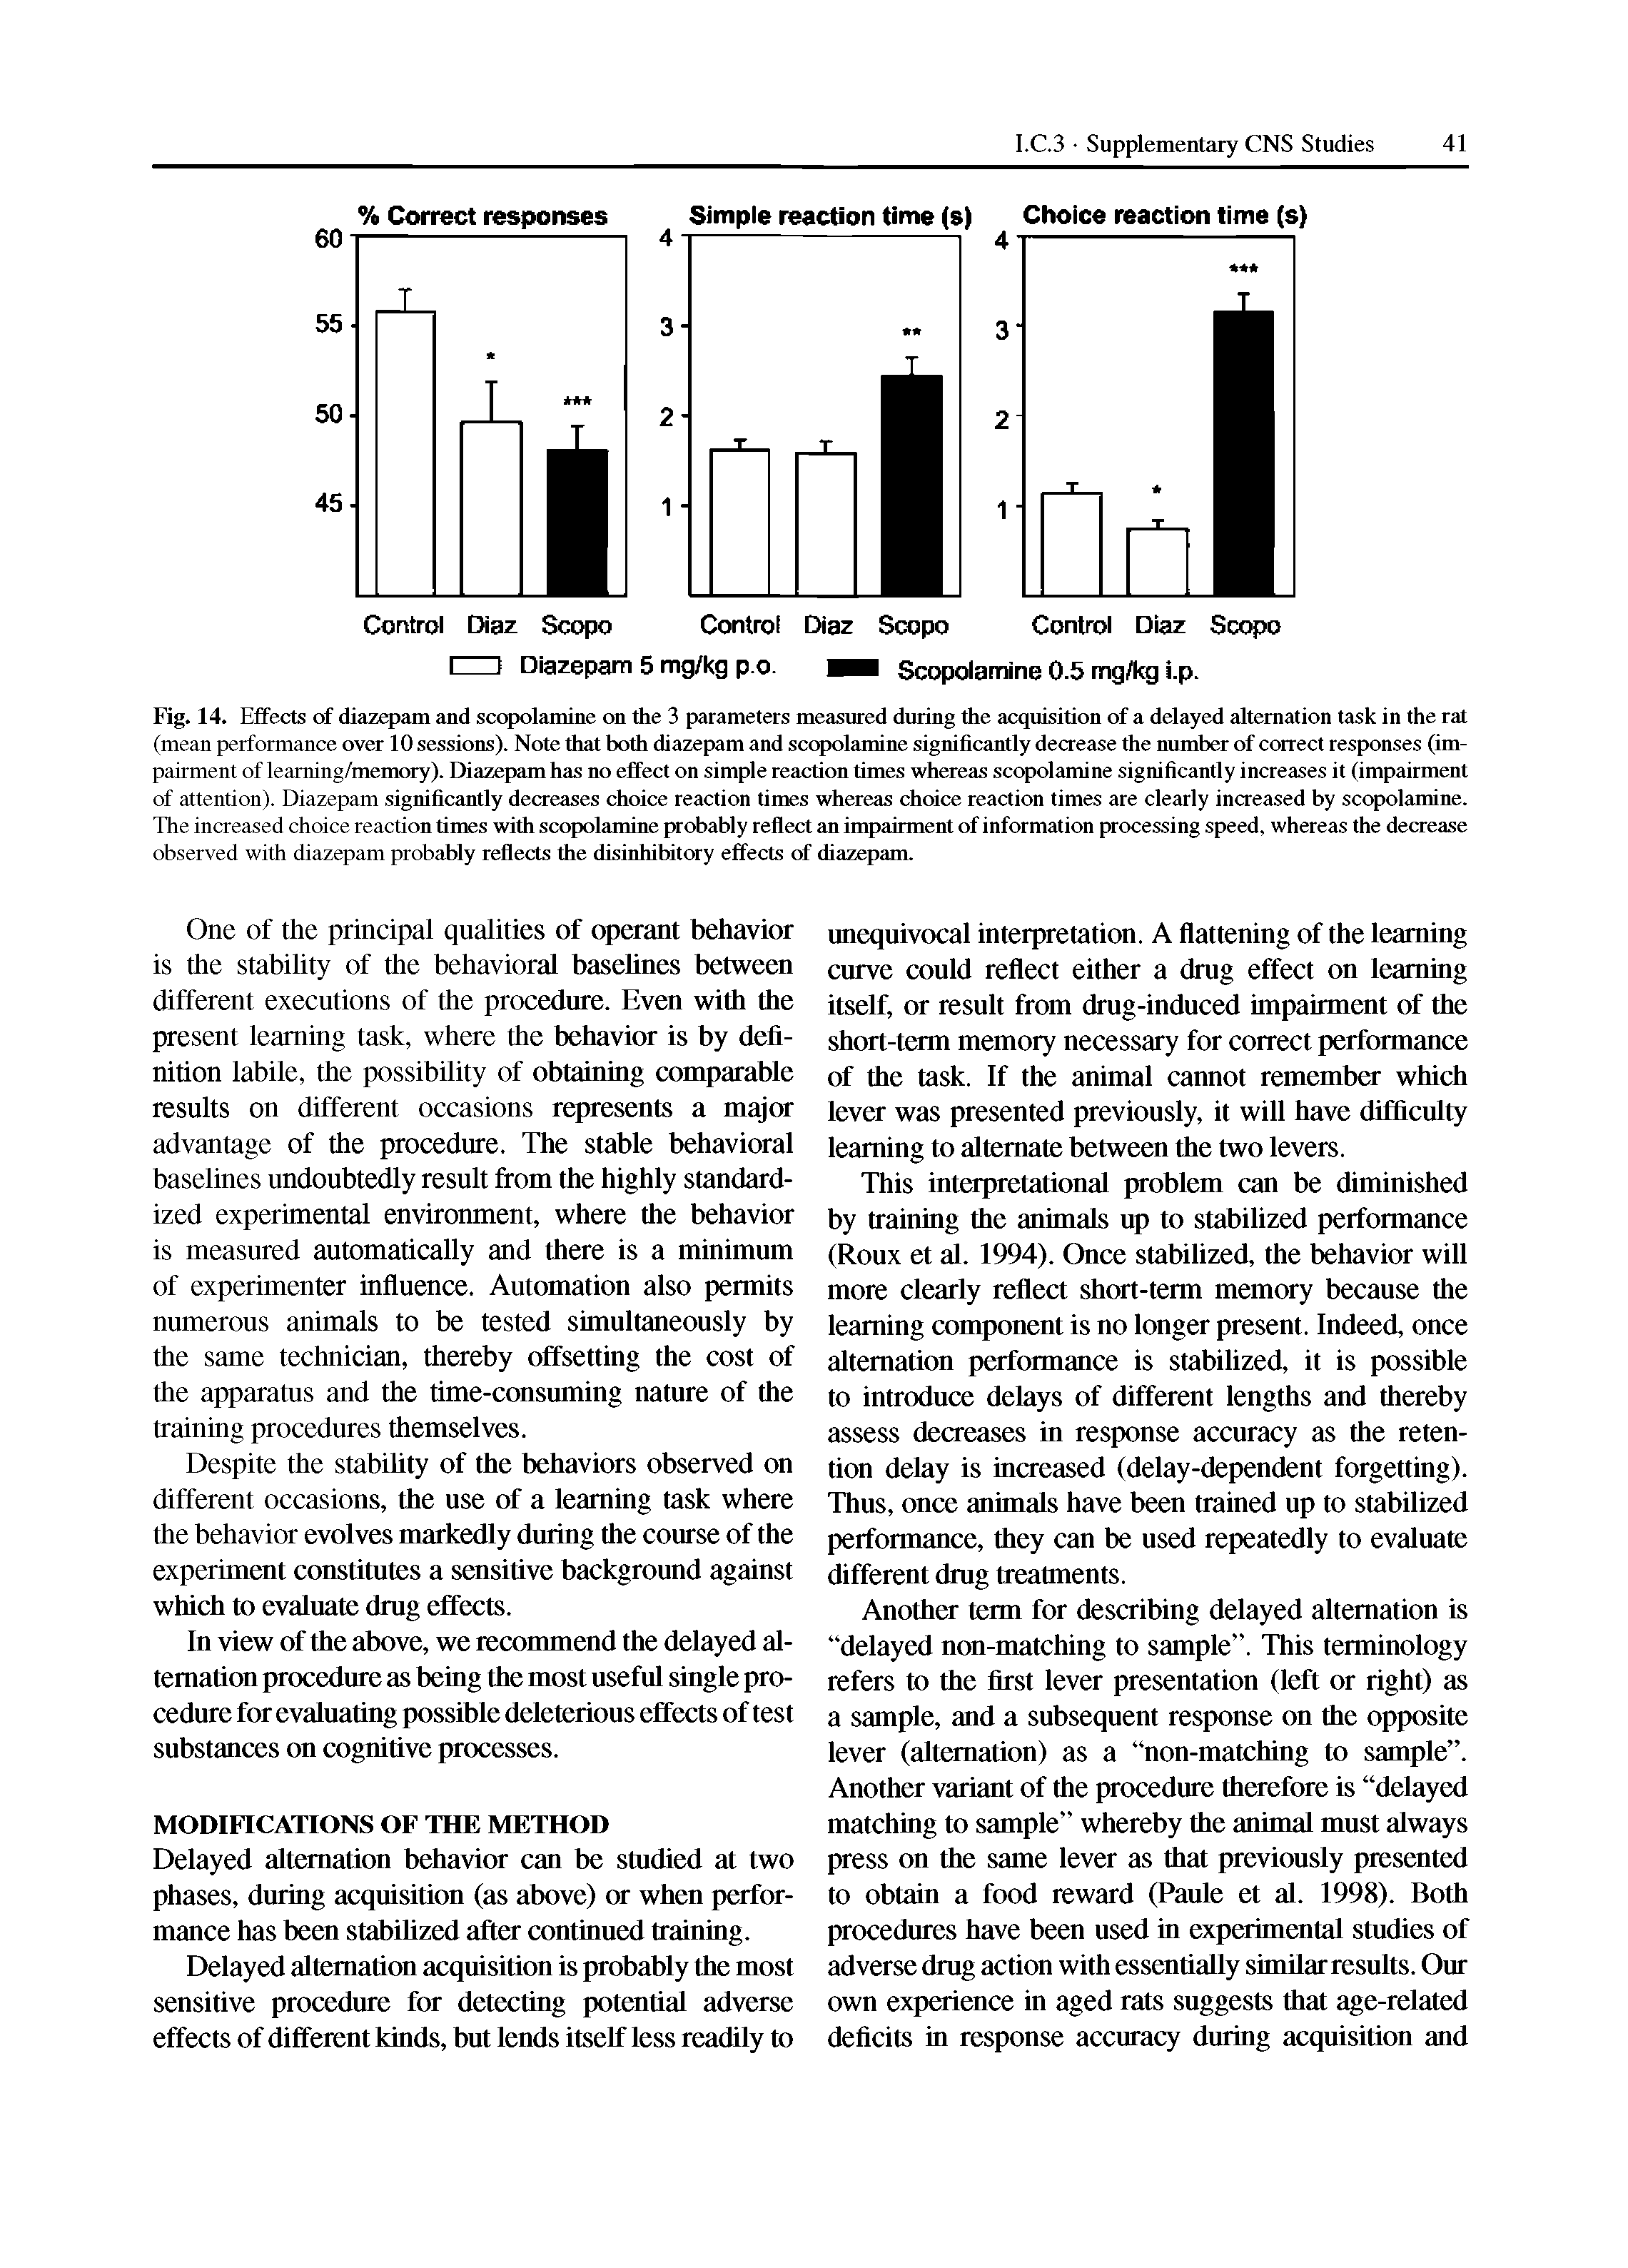 Fig. 14. Effects of diazepam and scopolamine on the 3 parameters measured during the acquisition of a delayed alternation task in the rat (mean performance over 10 sessions). Note that both diazepam and scopolamine significantly decrease the number of correct responses (impairment of learning/memory). Diazepam has no effect on simple reaction times whereas scopolamine significantly increases it (impairment of attention). Diazepam significantly decreases choice reaction times whereas choice reaction times are clearly increased by scopolamine. The increased choice reaction times with scopolamine probably reflect an impairment of information processing speed, whereas the decrease observed with diazepam probably reflects the disinhibitory effects of diazepam.